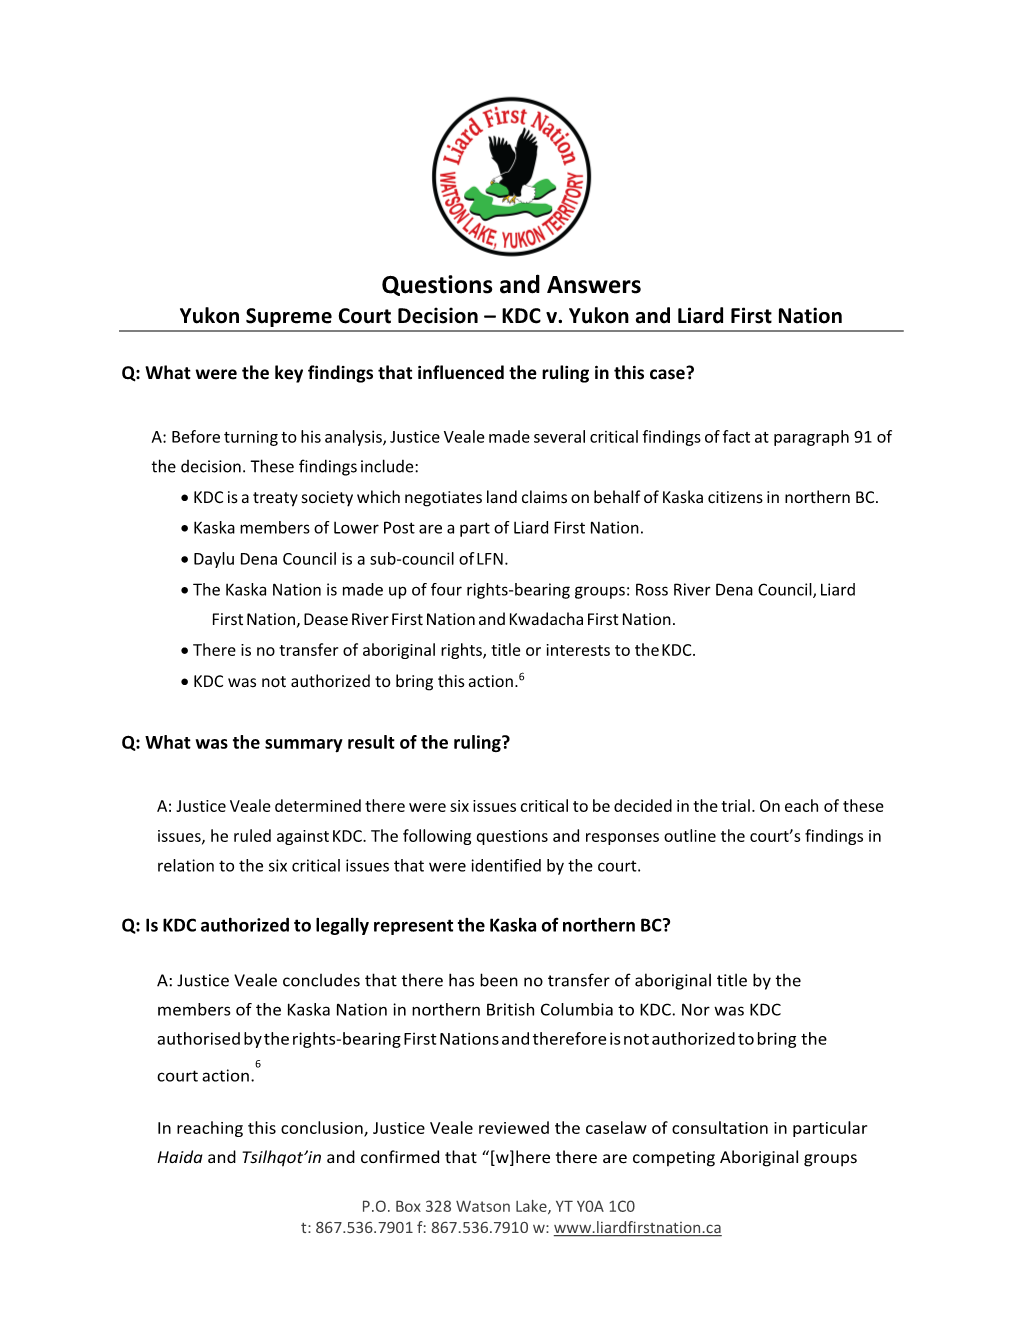 Questions and Answers Yukon Supreme Court Decision – KDC V